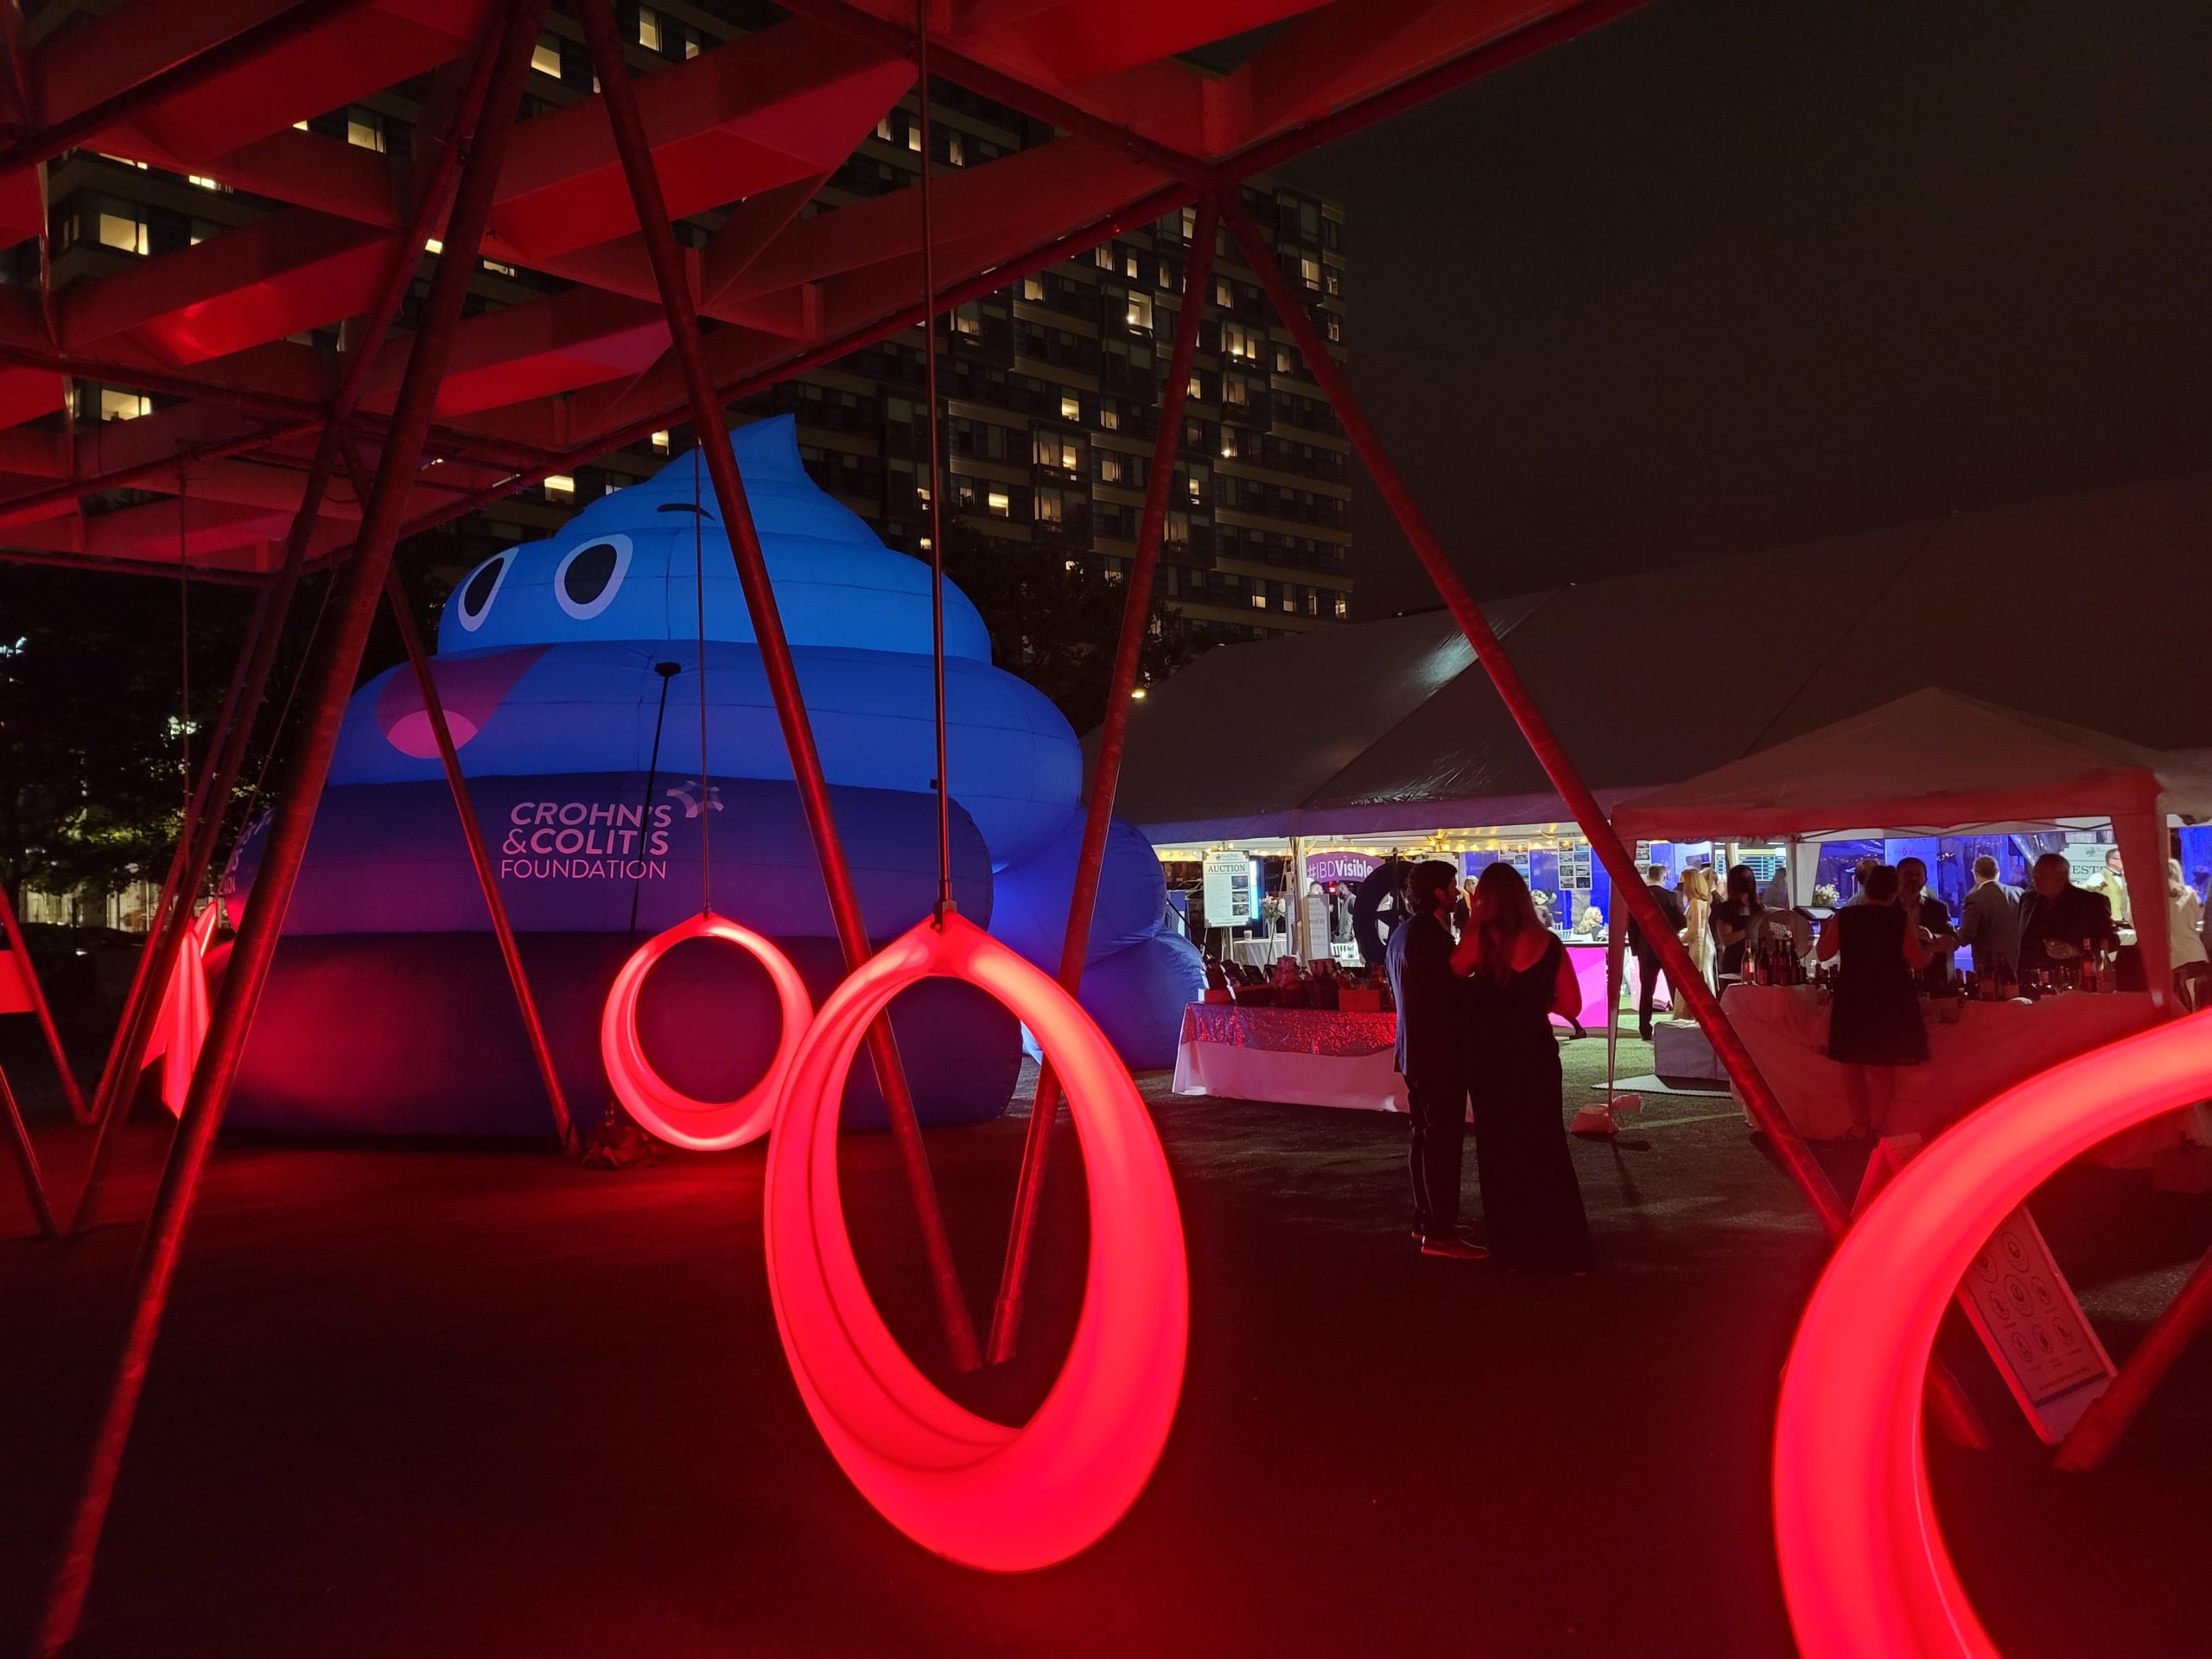 People surrounding blue and white tents with some ring-like red lights